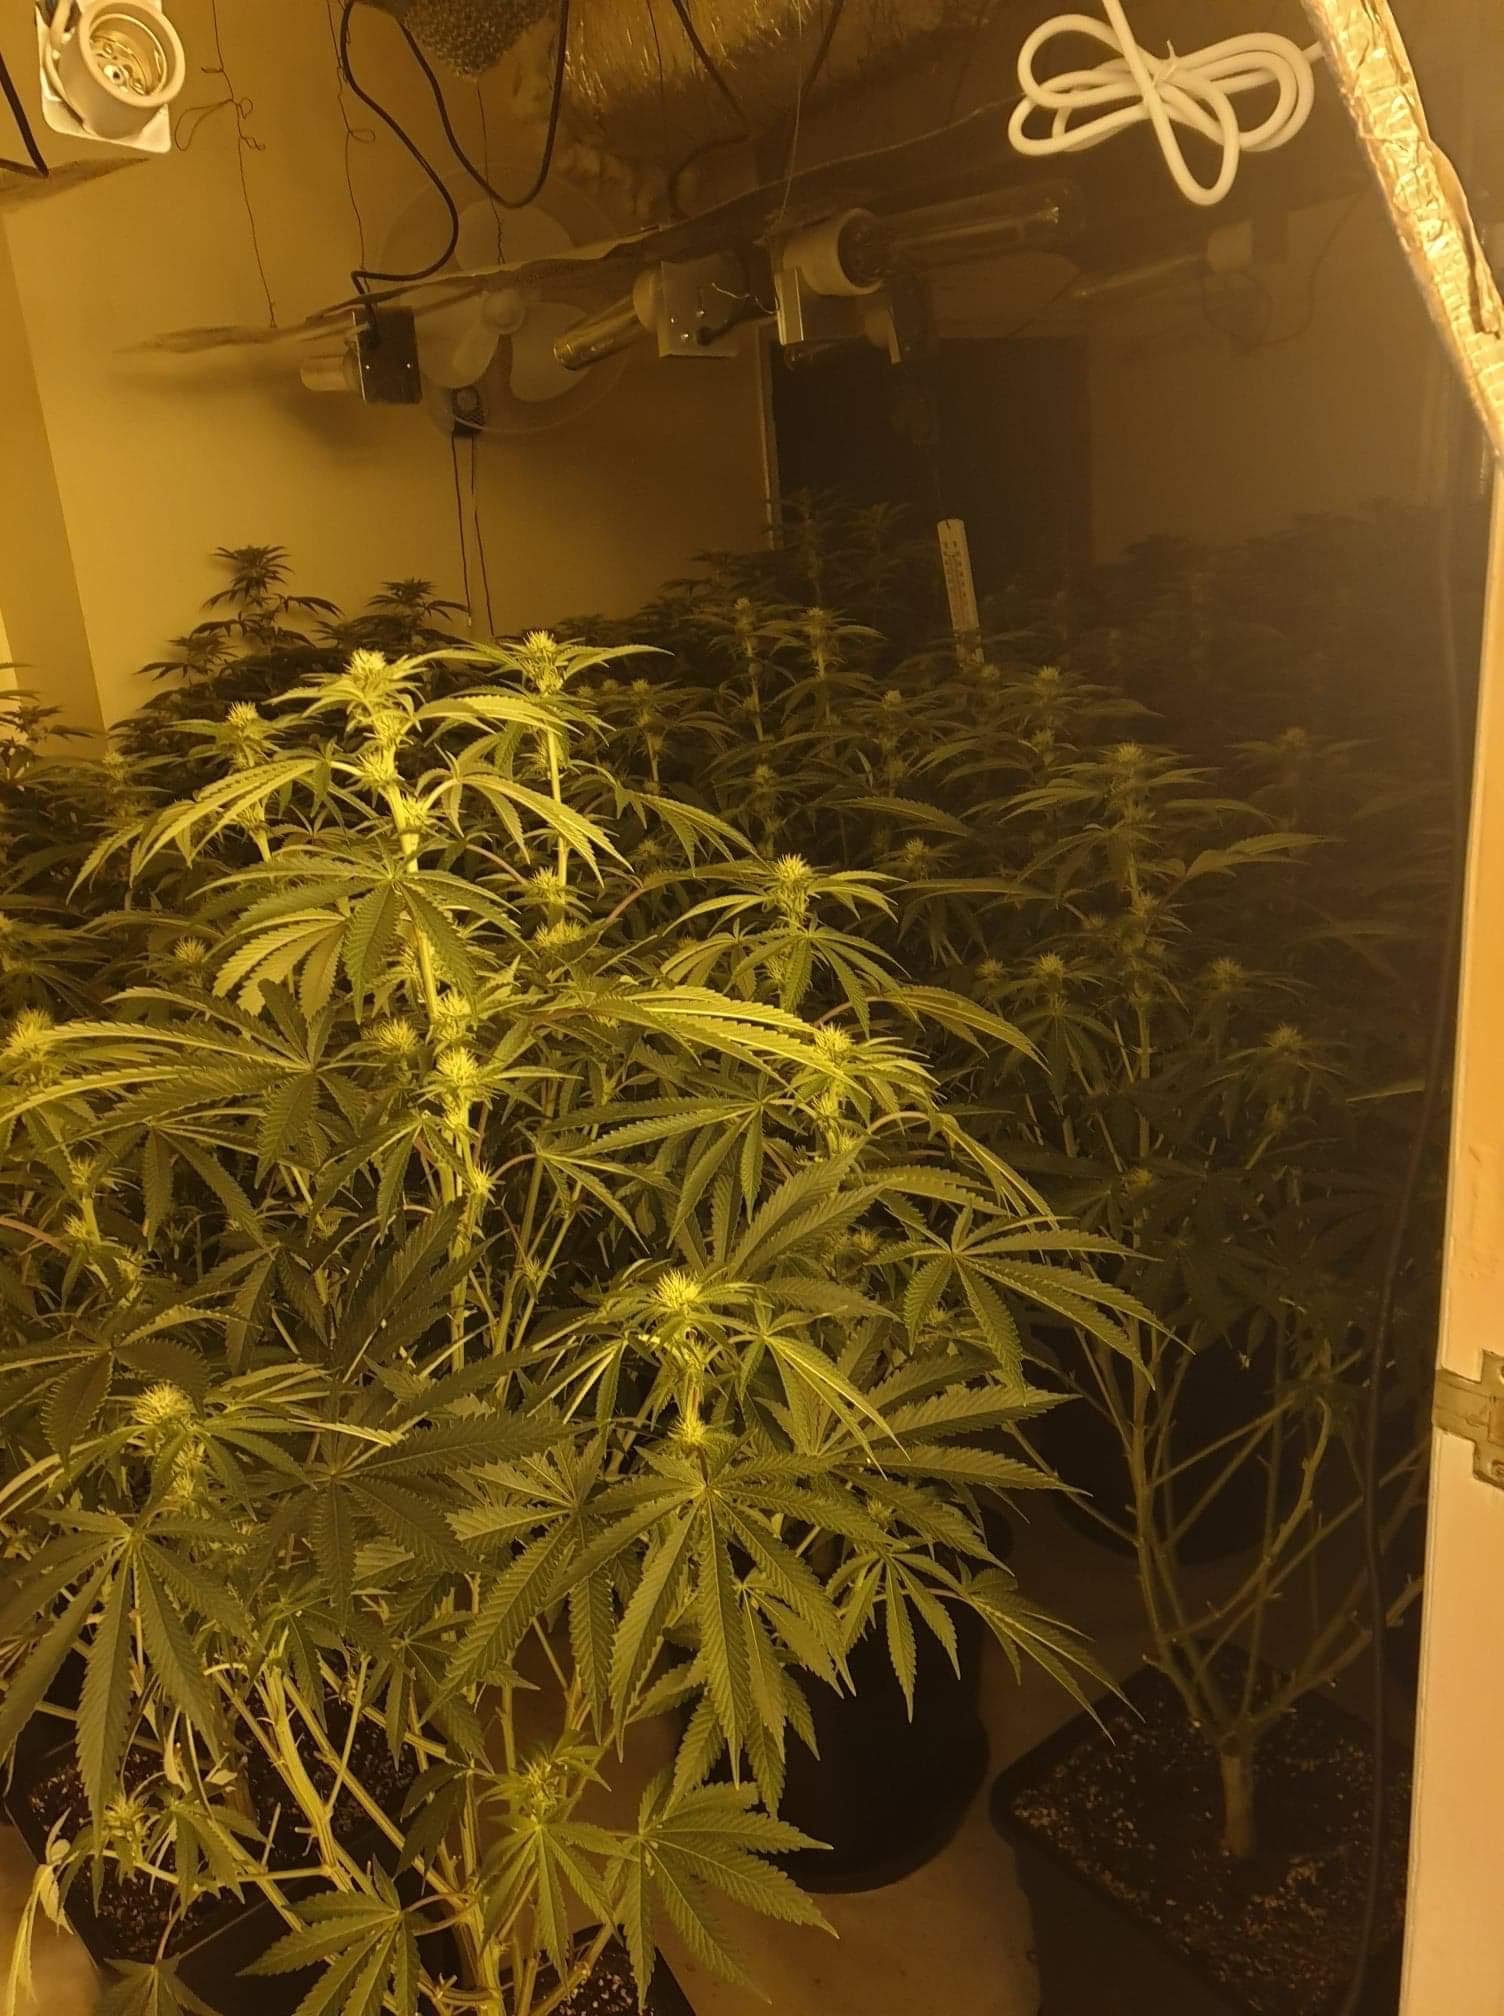 The cannabis farm that was found by police in Darcy Lever